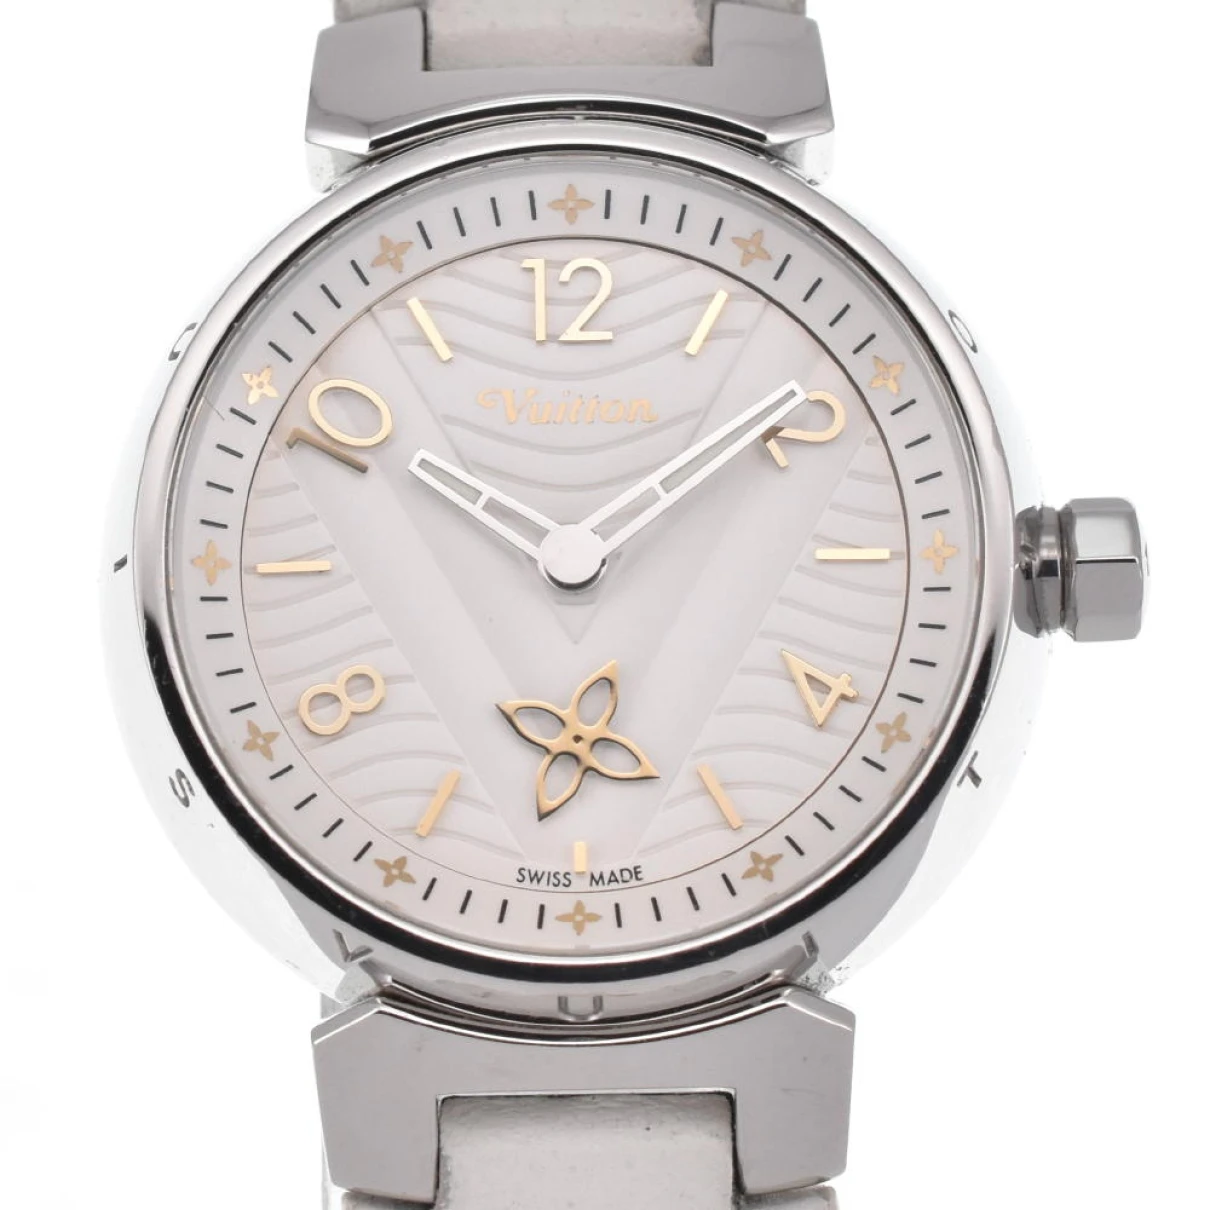 Pre-owned Louis Vuitton Tambour Watch In White